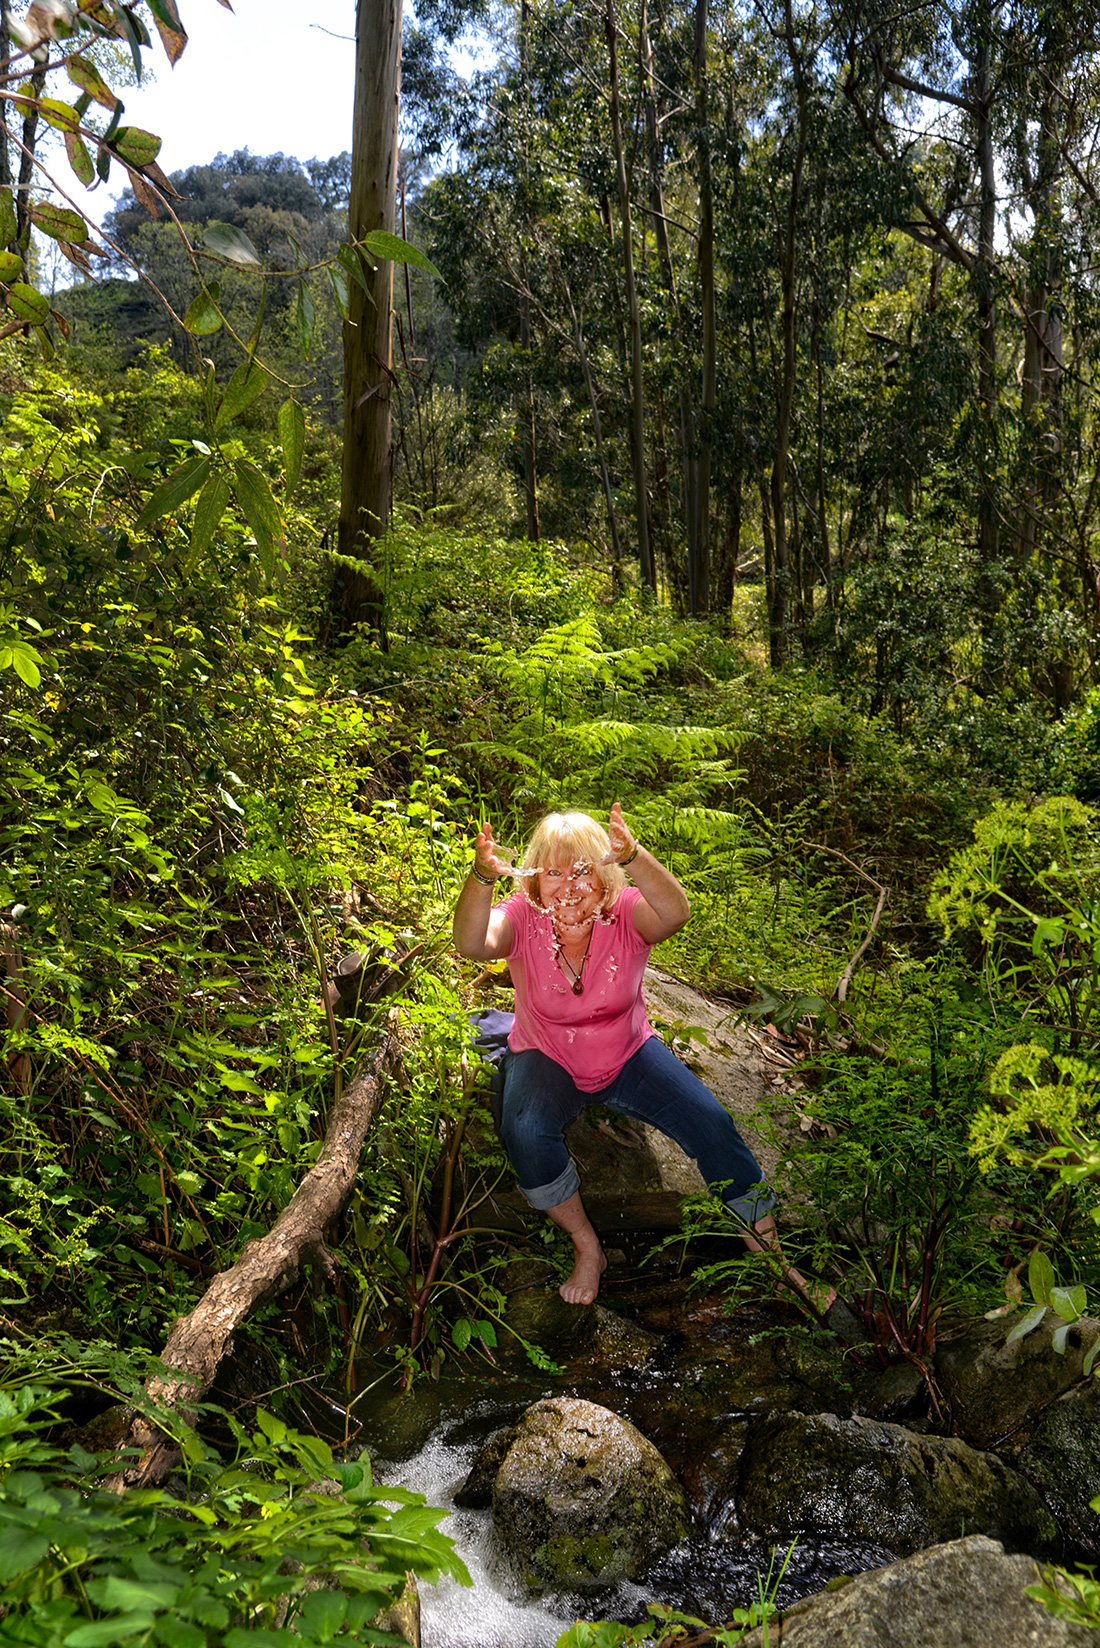 Suzanne Radford is a certified forest bathing guide and forest therapy practitioner. She helps people connect to nature through excursions in the Serra de Monchique mountain range of the Iberian Peninsula in Southern Portugal. Years ago, Radford discovered a secret waterfall in a forest she frequently visits. Now she offers her clients a chance to sit beside water, watch its movement and flow and listen as it cascades over the rocks. She encourages forest bathers to imagine the role the waterfall plays in feeding the mountain and surrounding forest, and to let the water wash over their hands and feet.